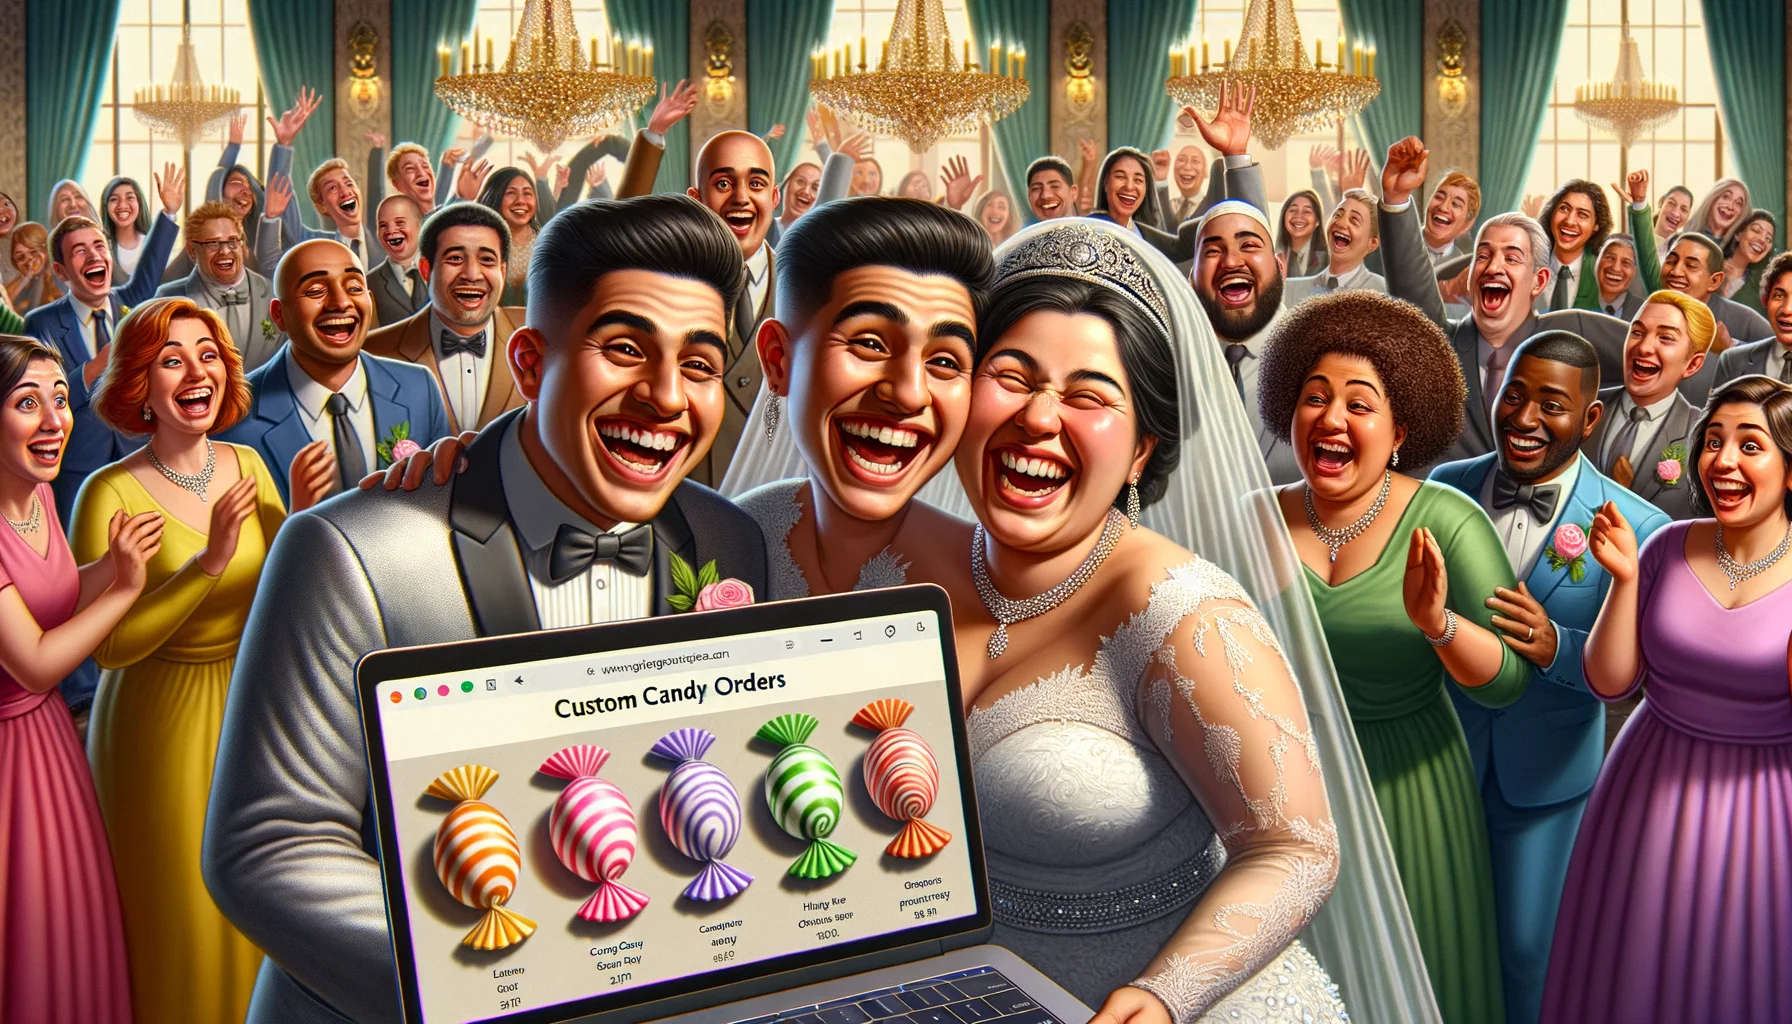 An amusing, realistic scenario where a wedding is about to take place. A lighthearted Hispanic bride and a delighted South Asian groom, both dressed in their elegant wedding outfits, smile at the bustling scene before them. In the foreground, the laptop screen is seen open on a webpage offering custom candy orders for weddings. Elegant candy samples, all arranged neatly, are seen on the screen. Colors of candies match with the wedding theme colors. Around them is a variety of their friends and family of all descents and genders, chuckling and offering their candy preferences, making the atmosphere lively and joyful.